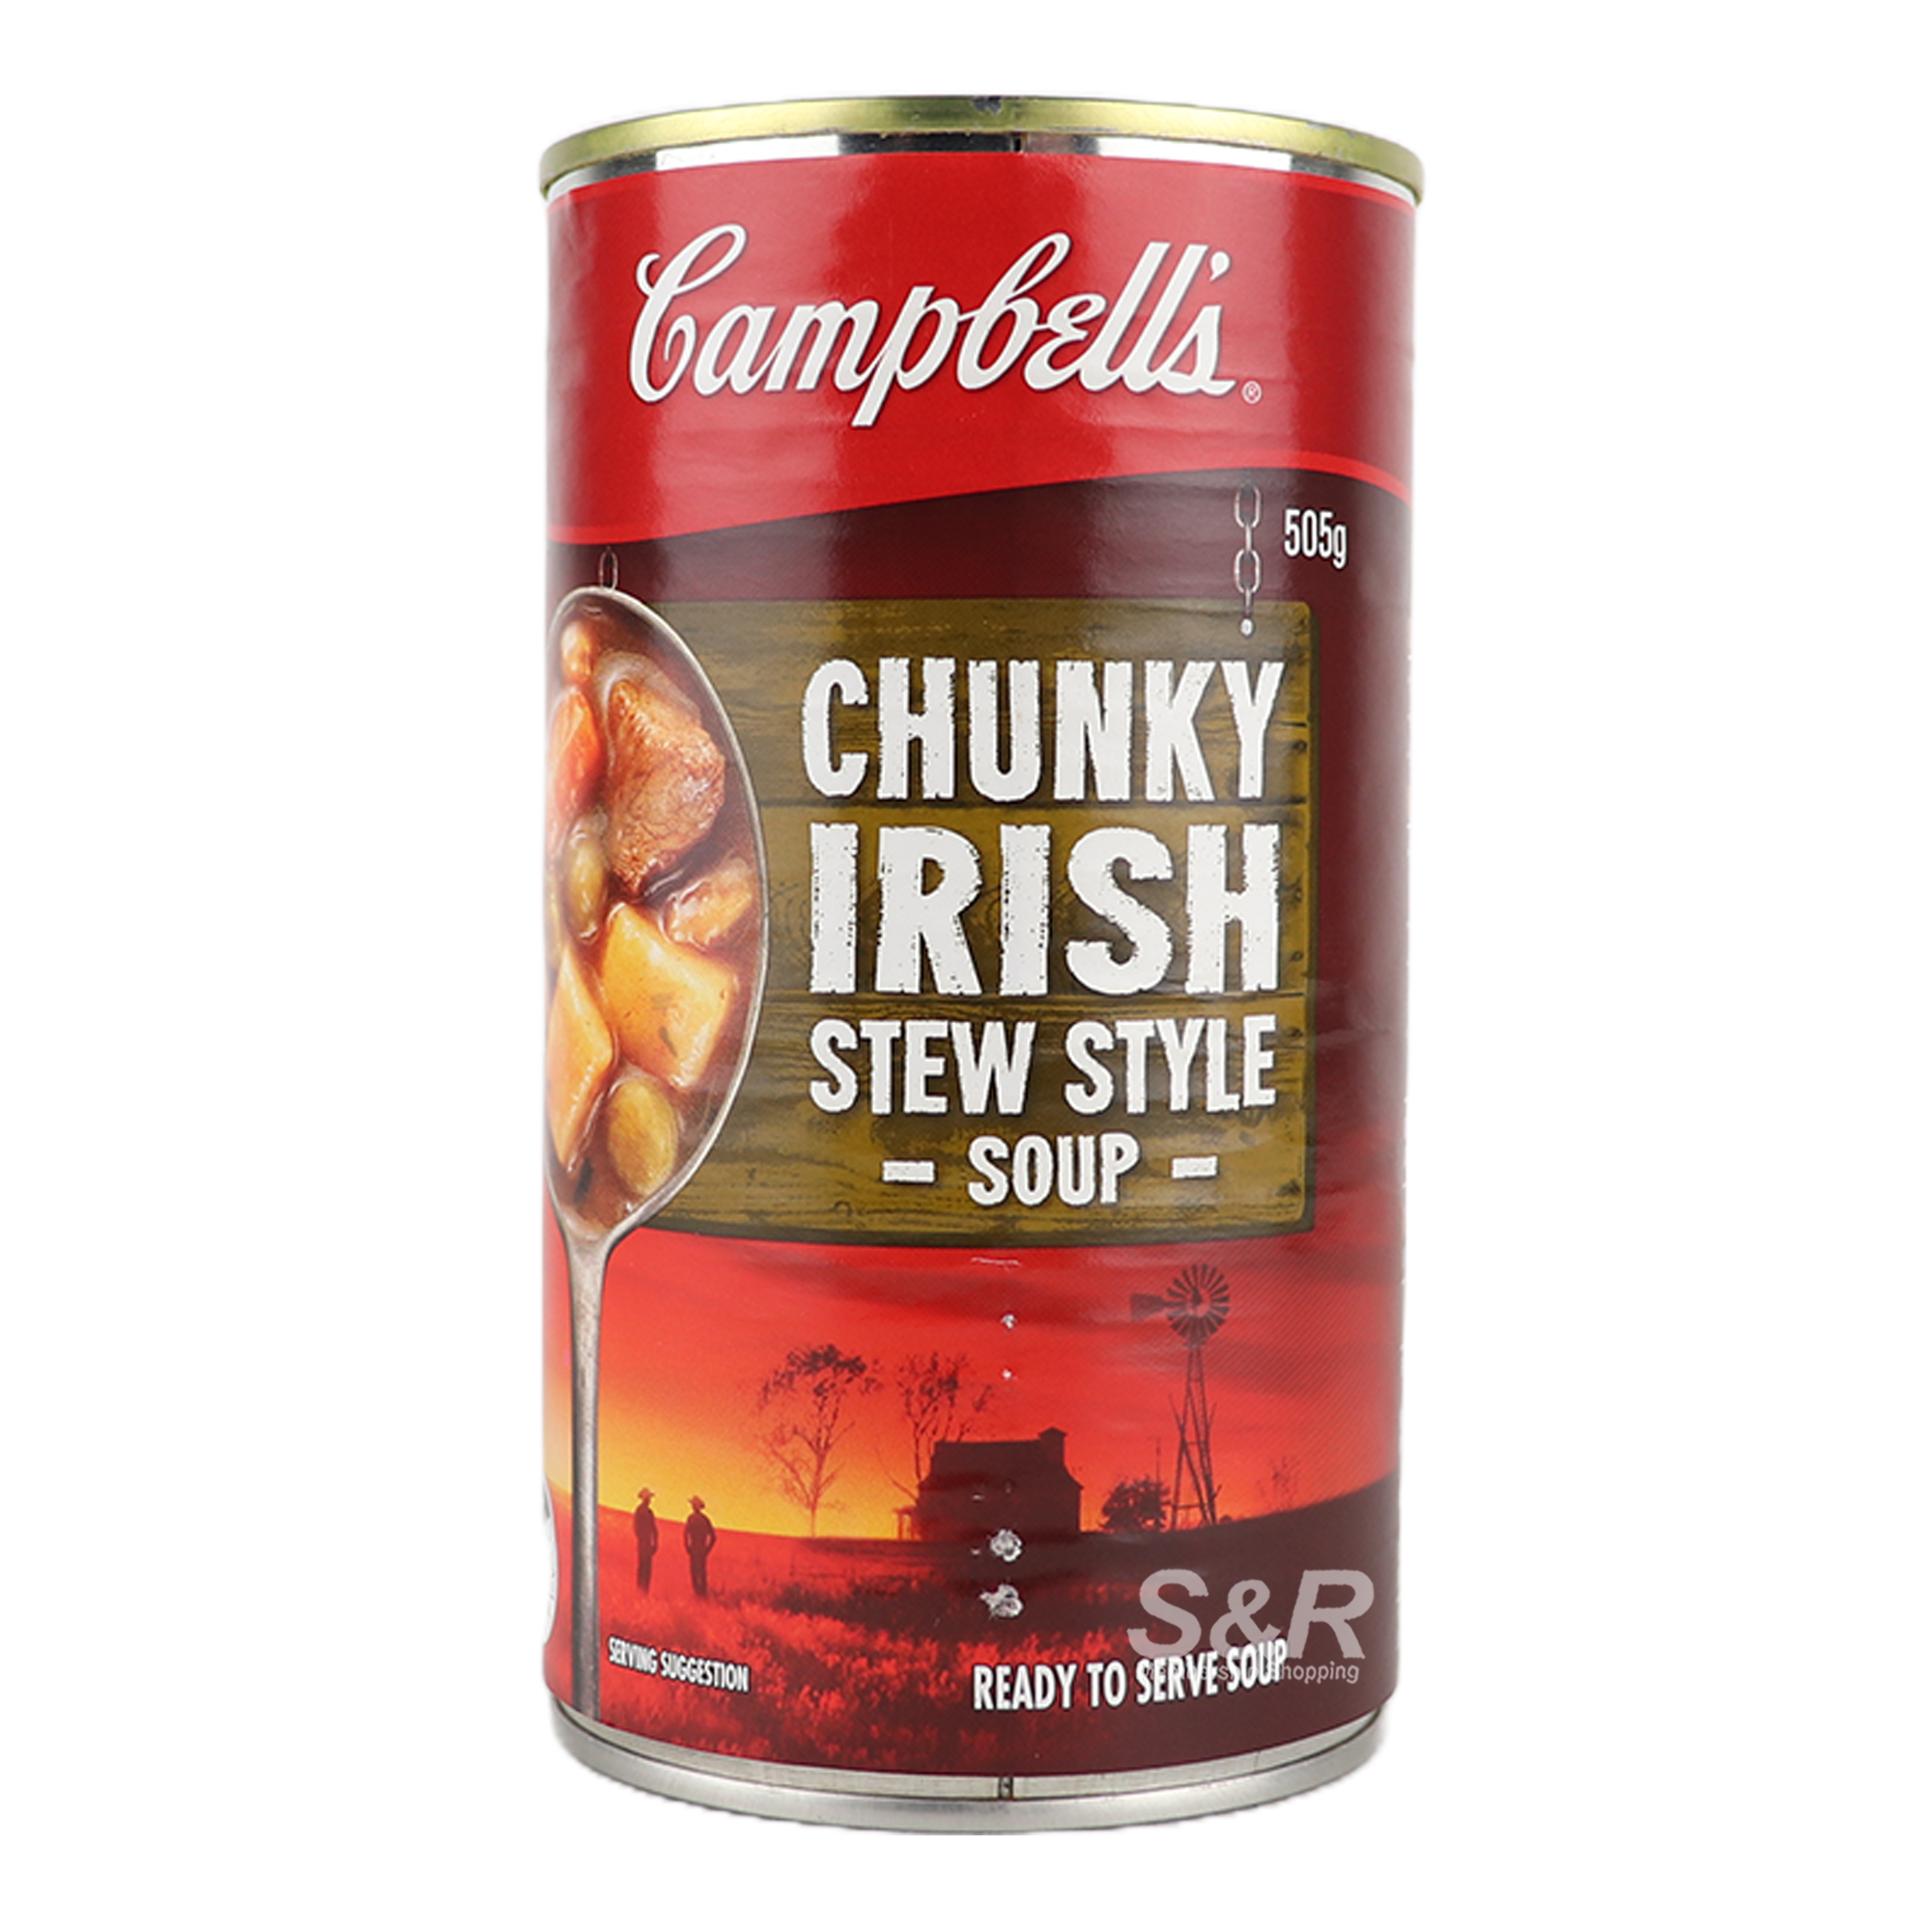 Campbell's Chunky Irish Stew Style Soup 505g